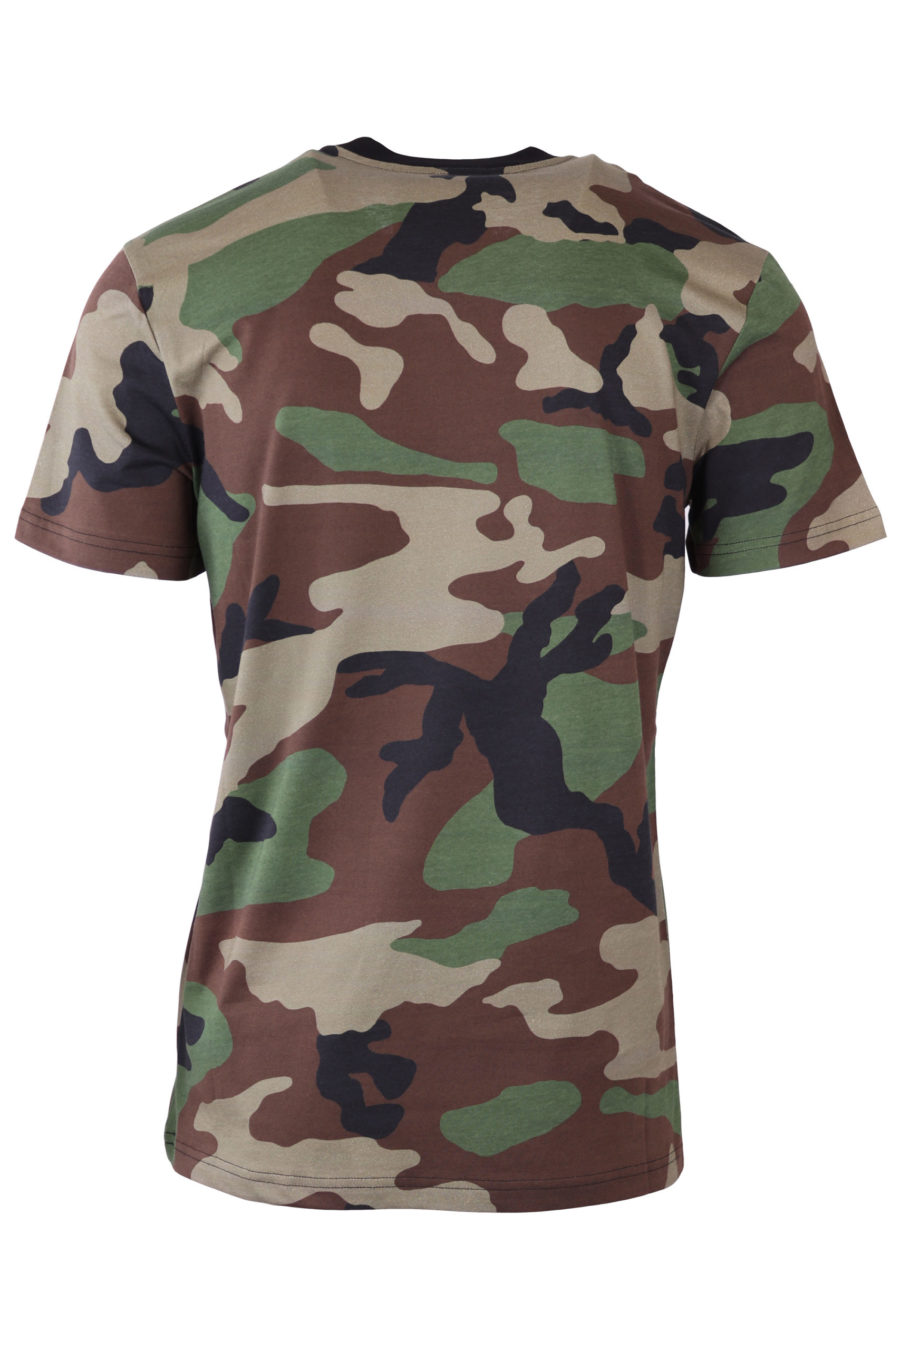 Moschino Couture military T-shirt with logo - IMG 6540 scaled